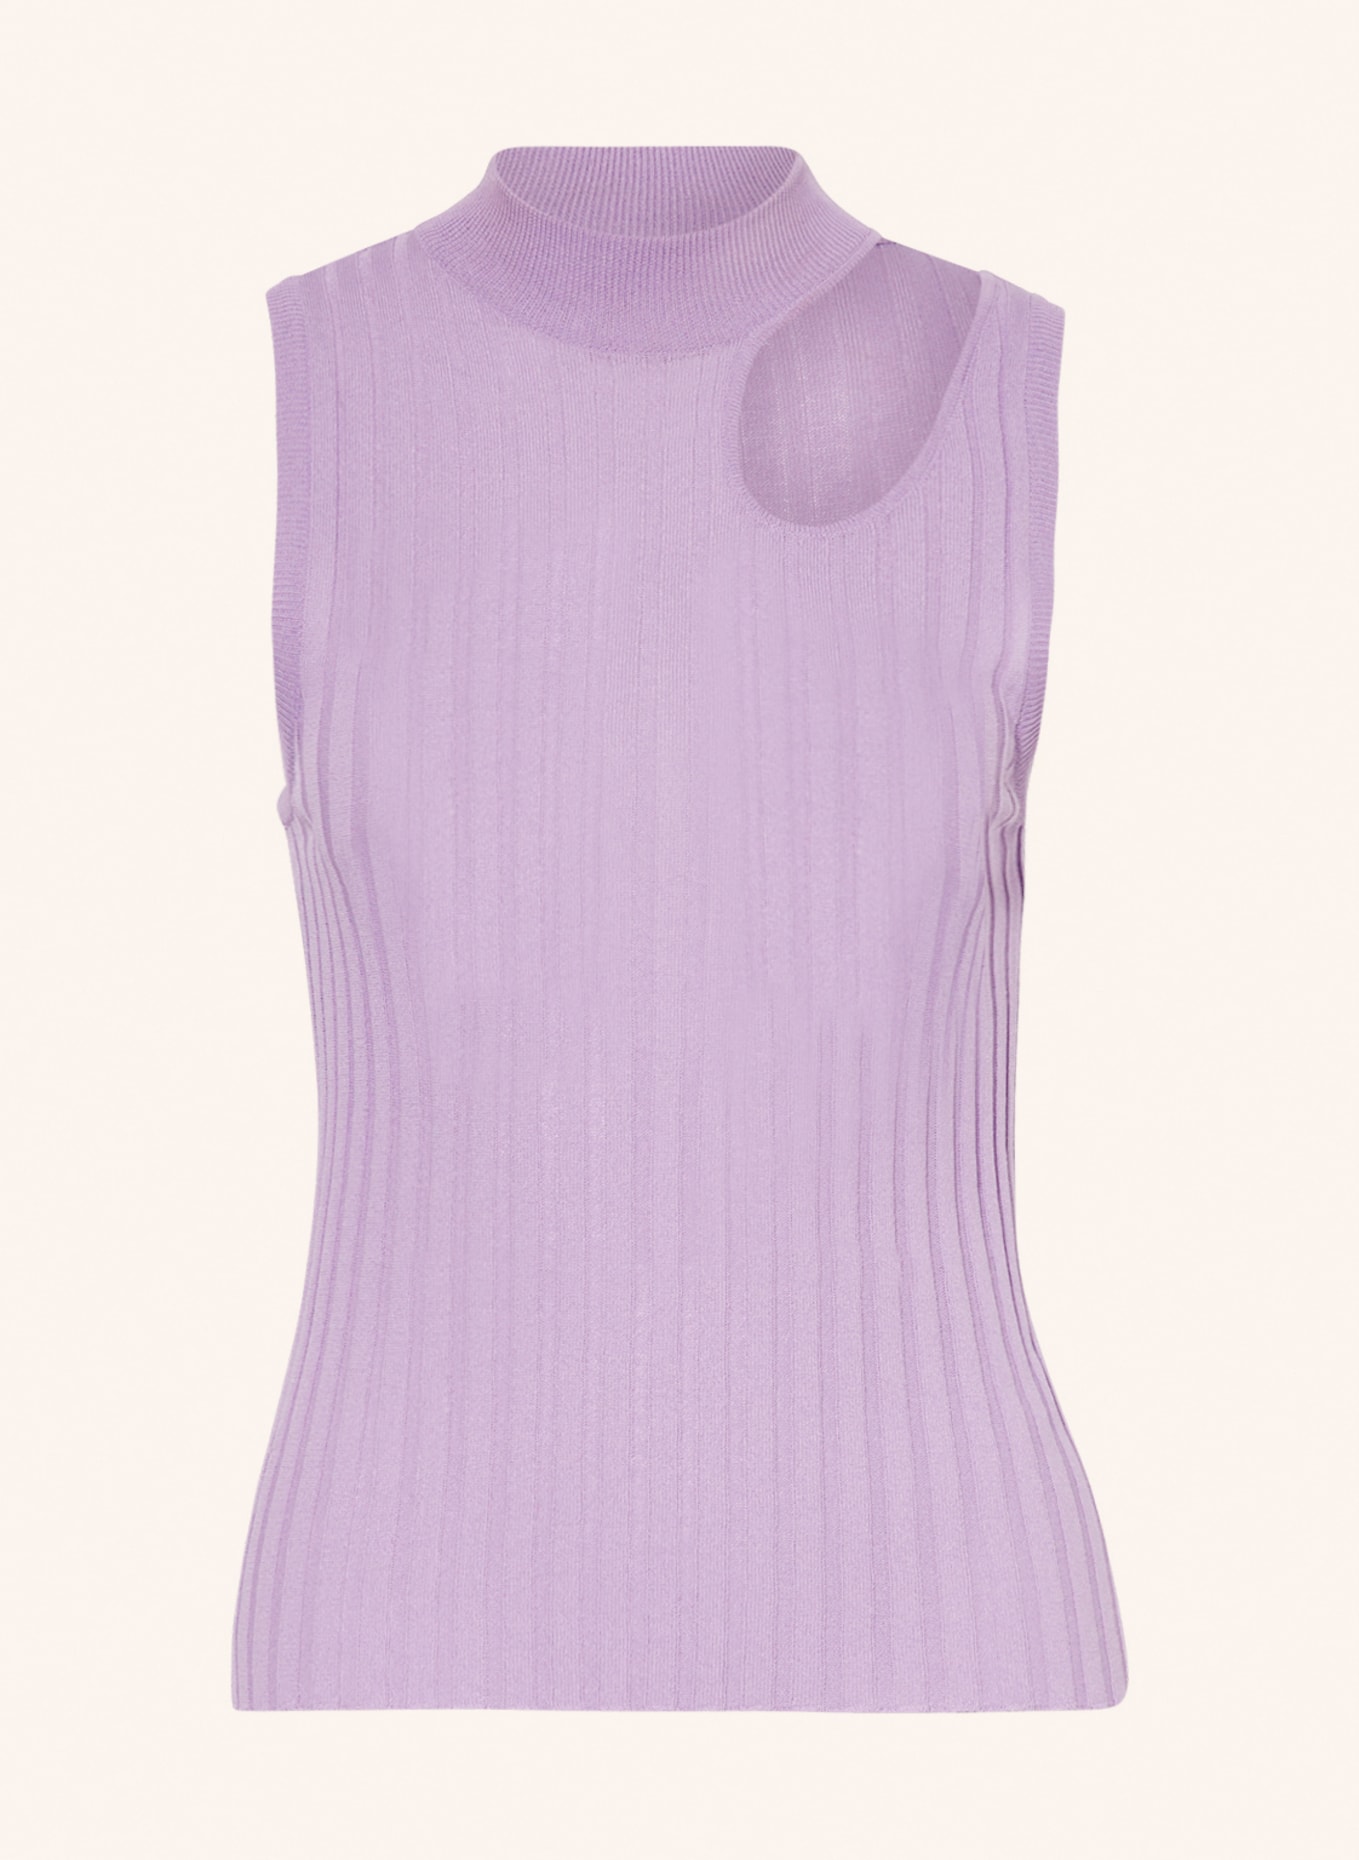 RIANI Knit top with cut-out, Color: LIGHT PURPLE (Image 1)